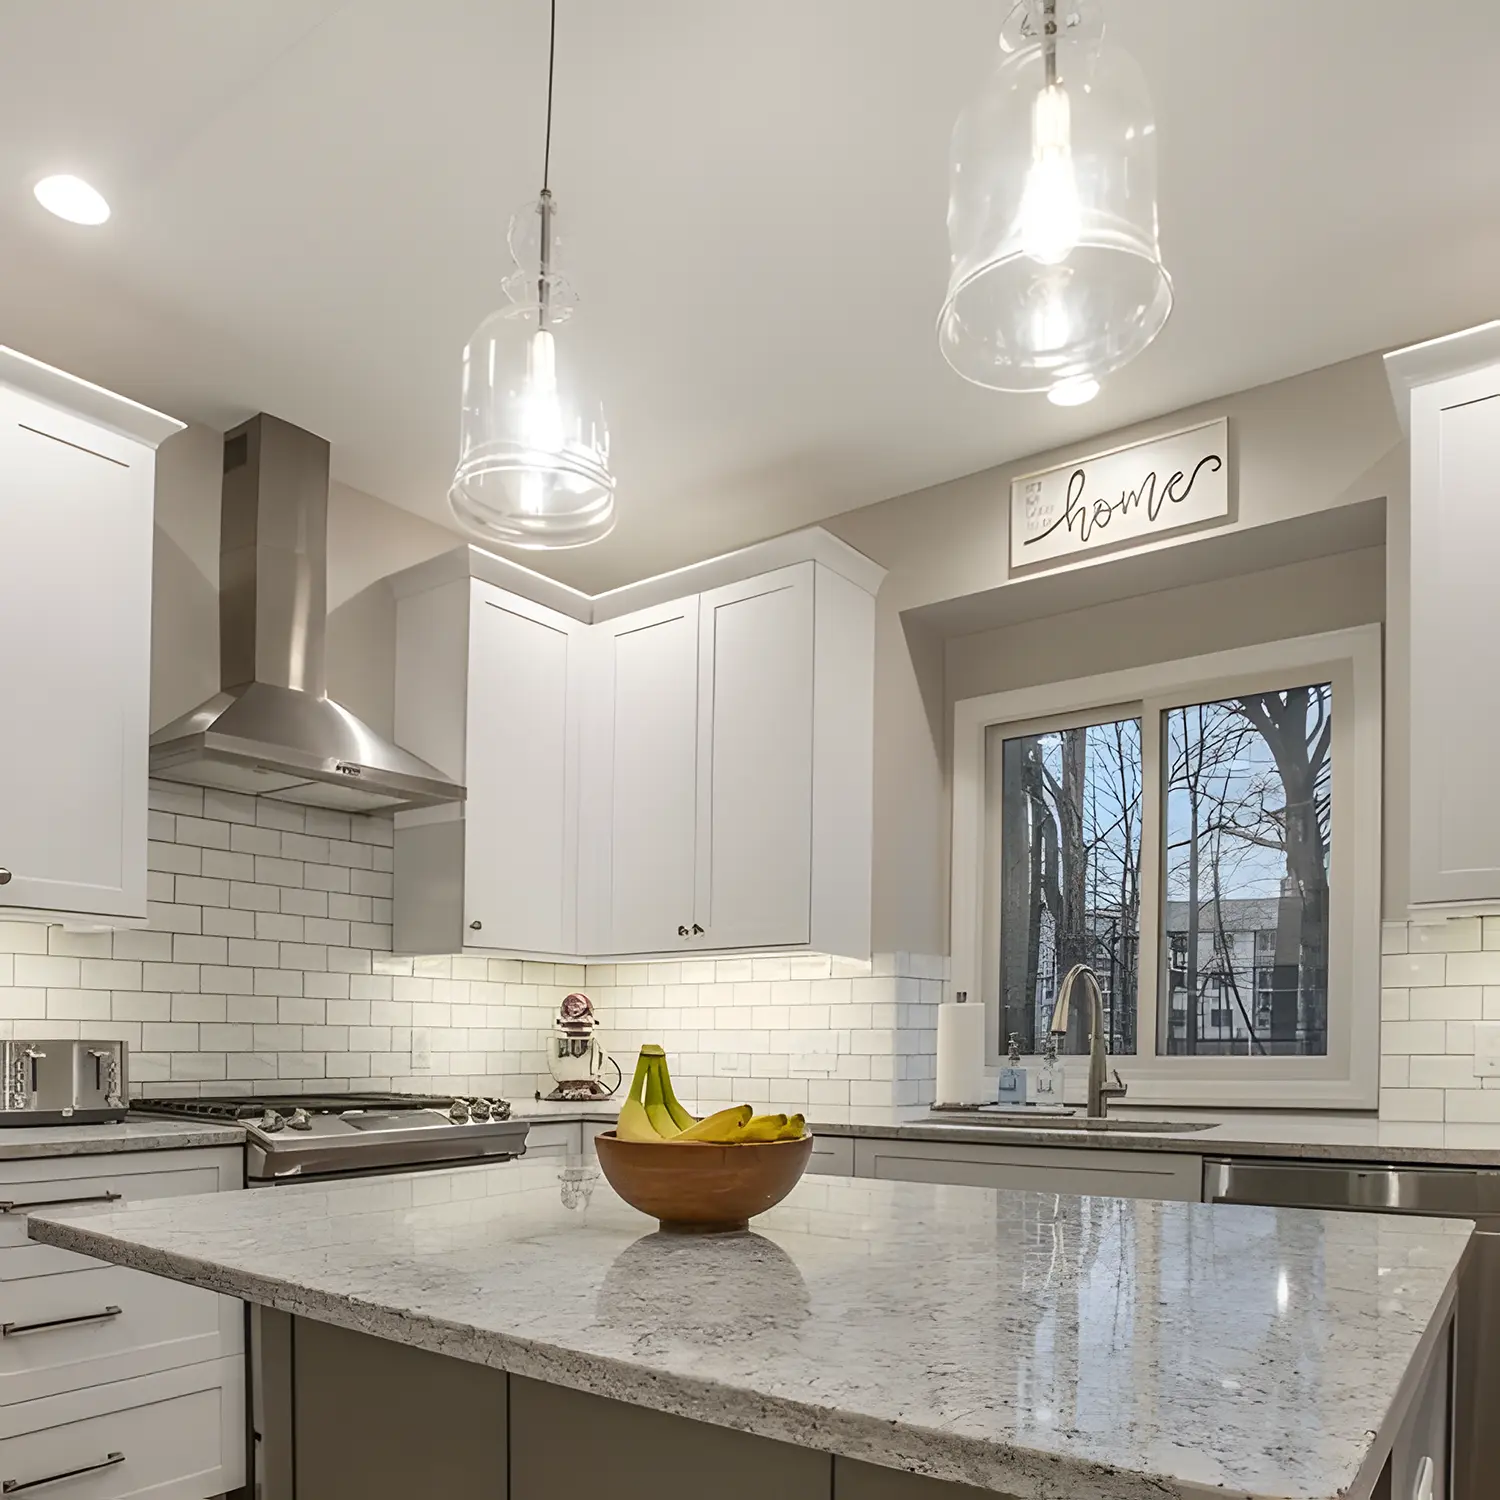 Gorgeous New Kitchen Lighting over Island with oven and kitchen sink in rear